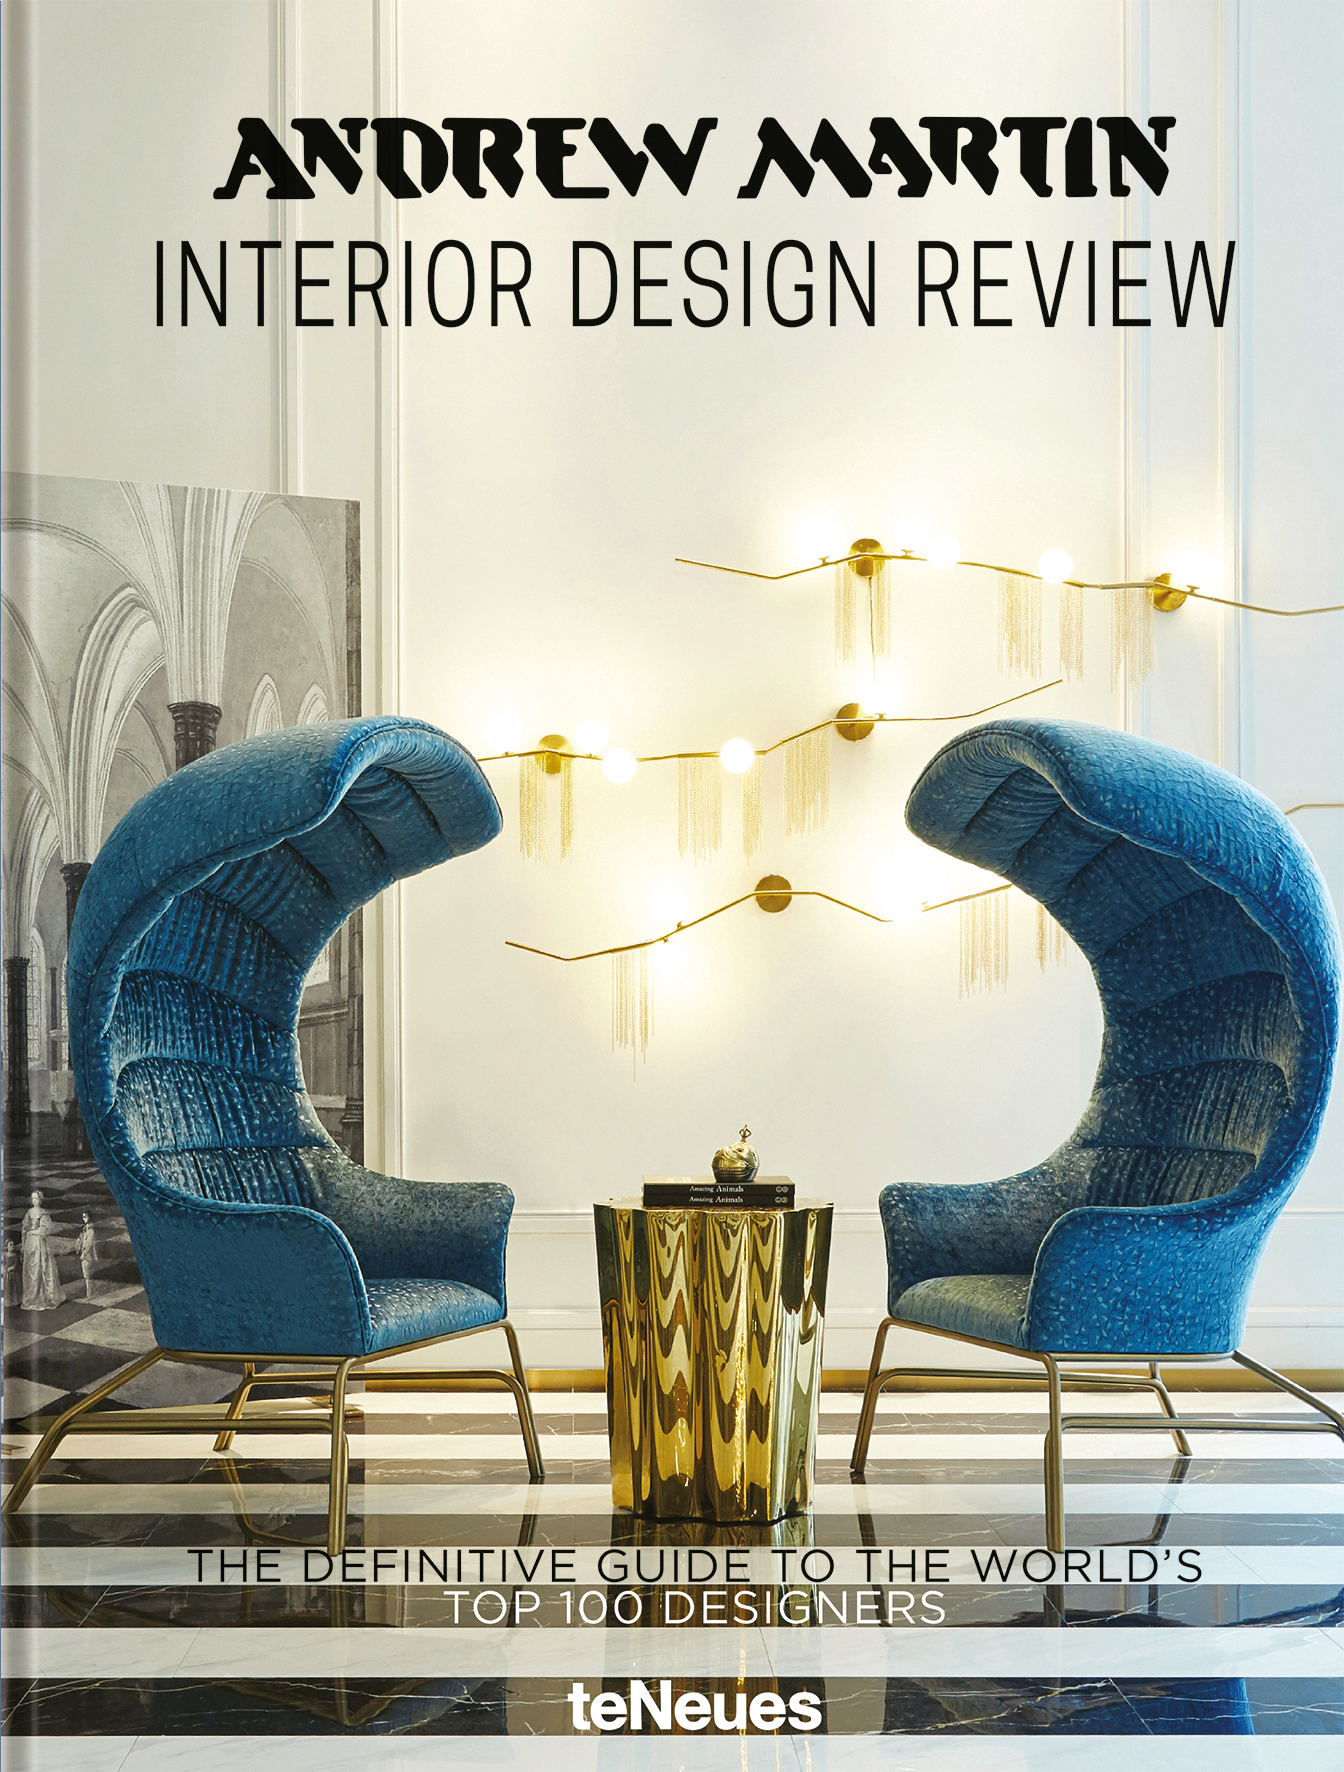 Luxury interior space with two blue velvet curved chairs, gold centre table, ANDREW MARTIN INTERIOR DESIGN REVIEW, in black font above.